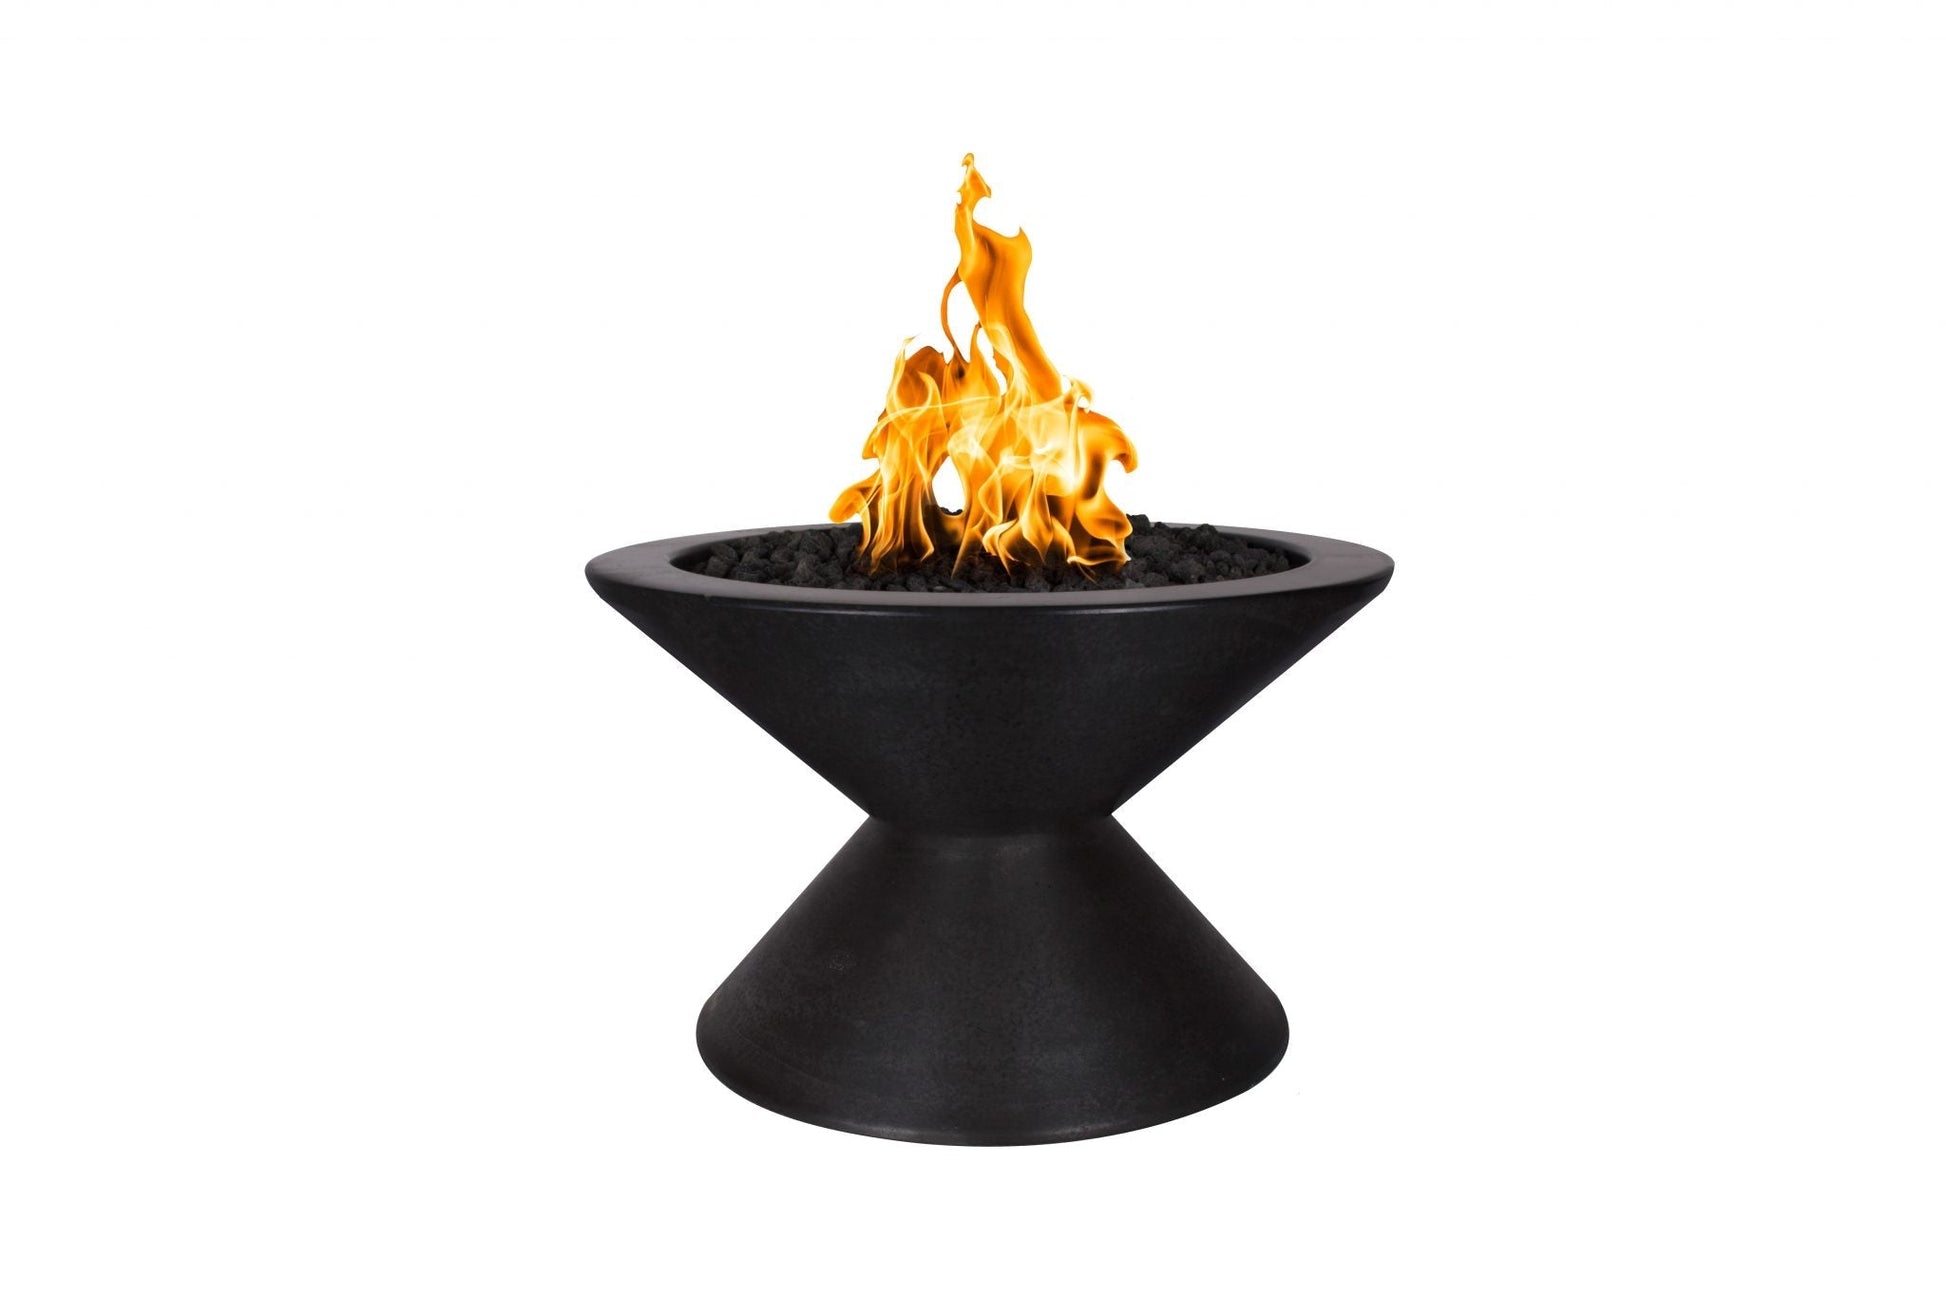 The Outdoor Plus Round Lucia 31" Brown GFRC Concrete Liquid Propane Fire Pit with 110V Electronic Ignition